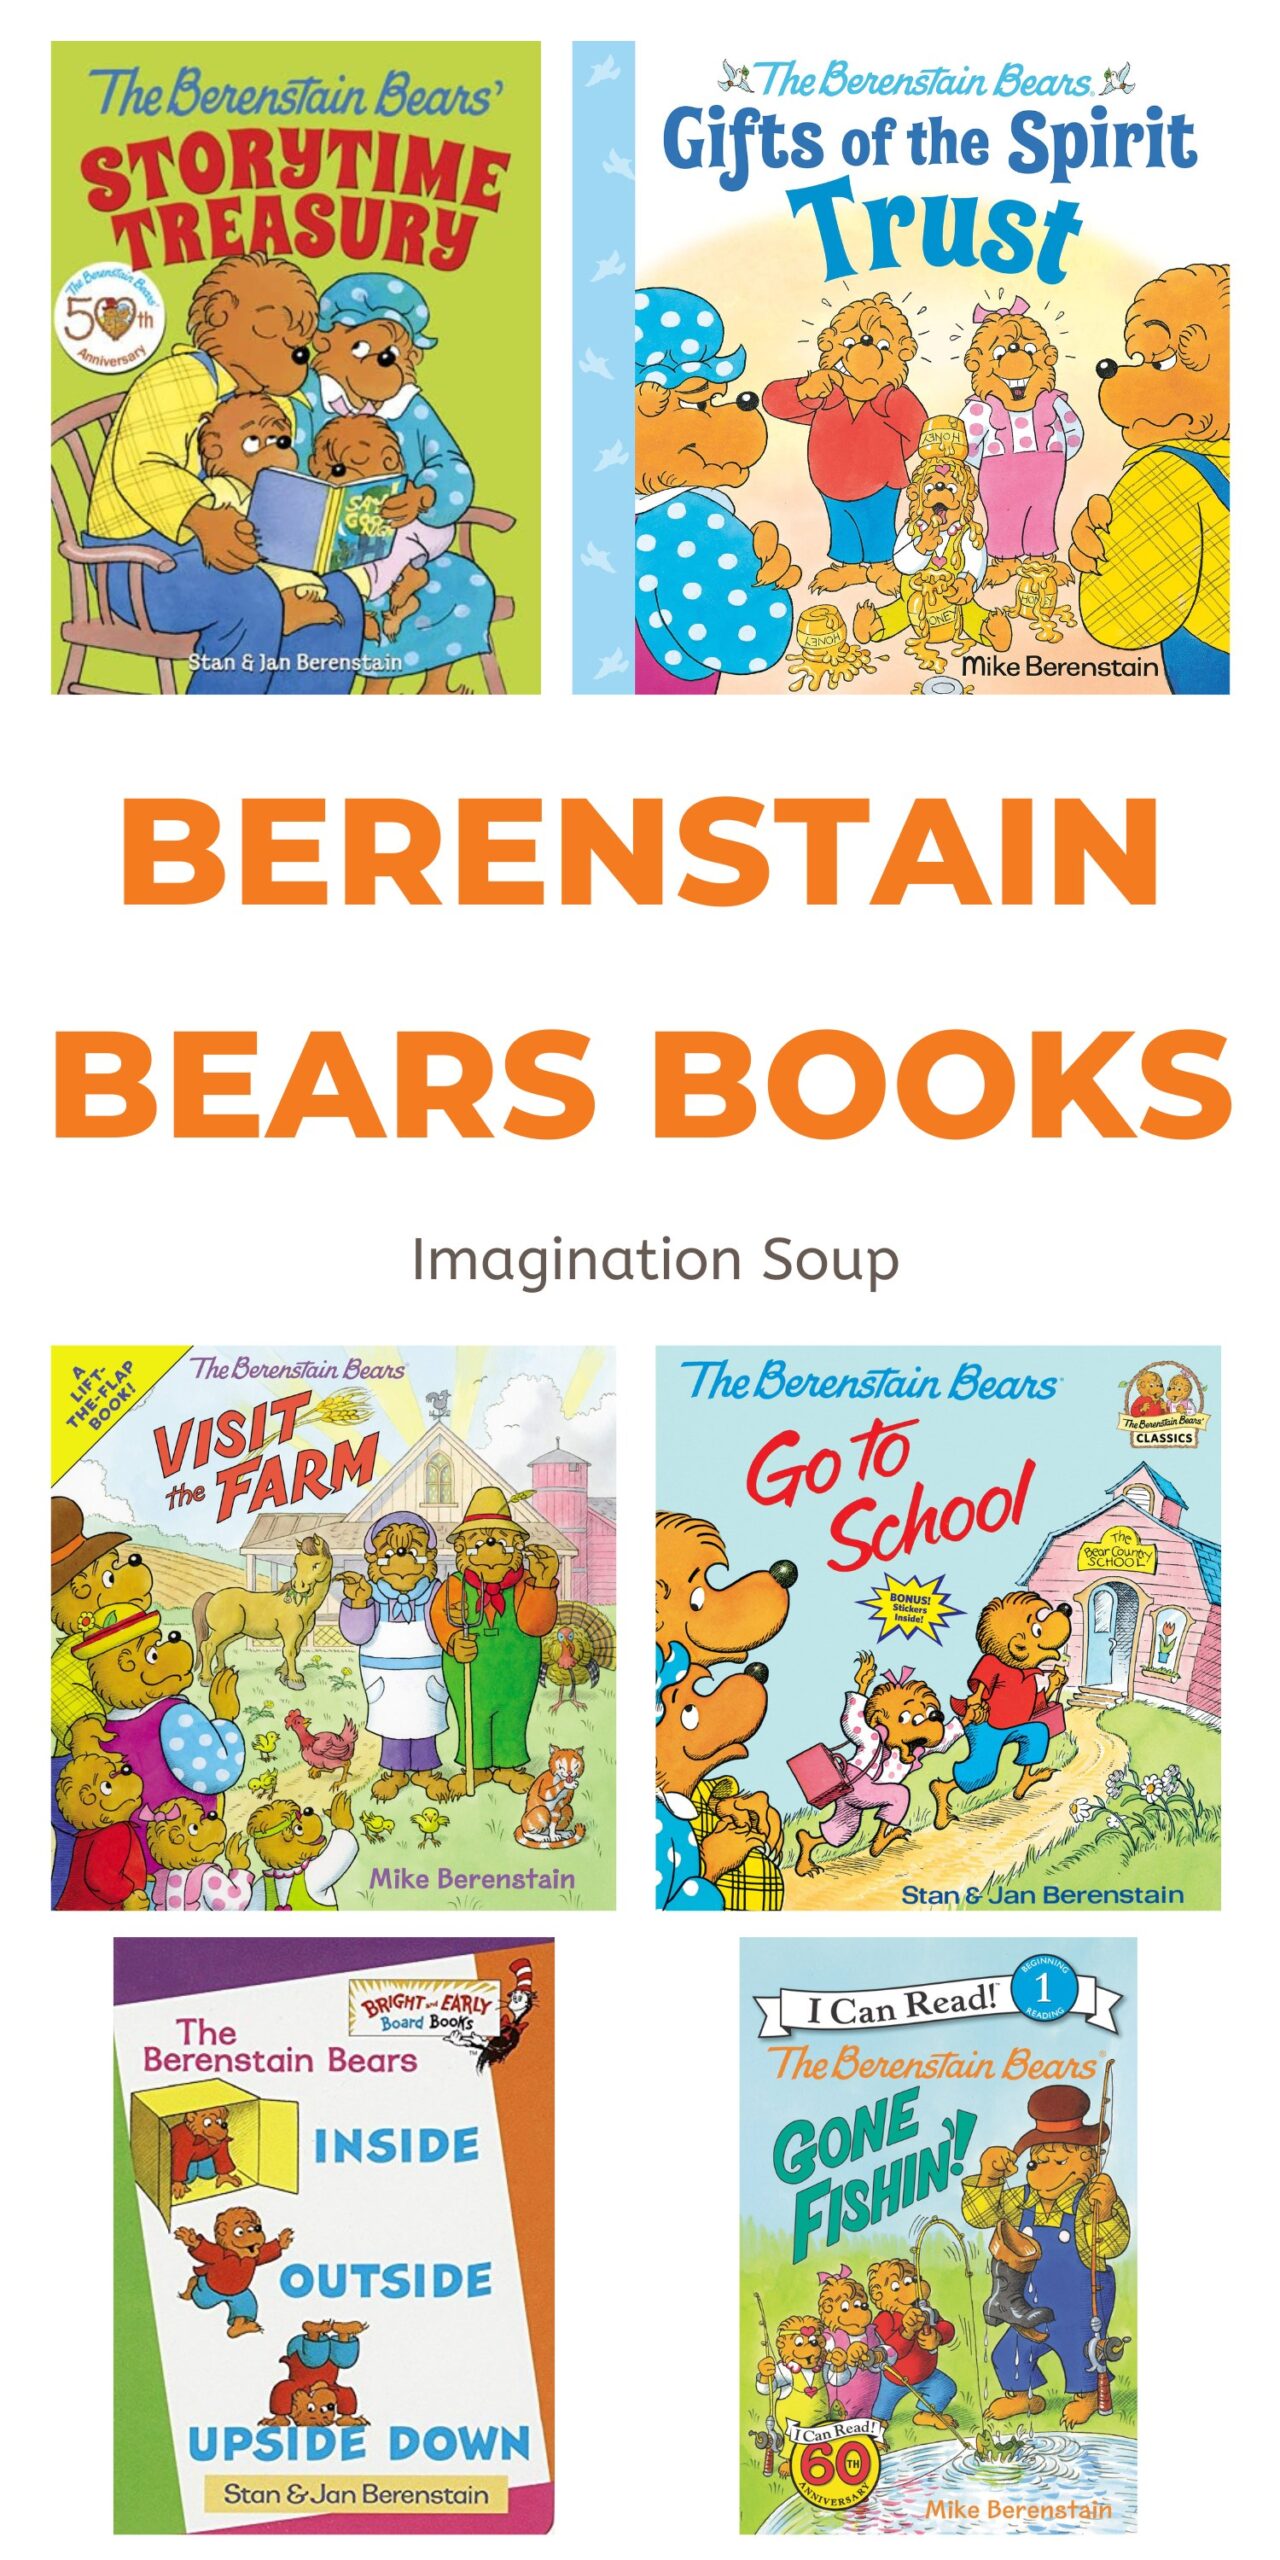 What's new with the Berenstain Bears books? See all of the different children's books in the book series. Then scroll down to read my interview with Jan and Stan Berenstain's son, Mike Berenstain, from 2011.